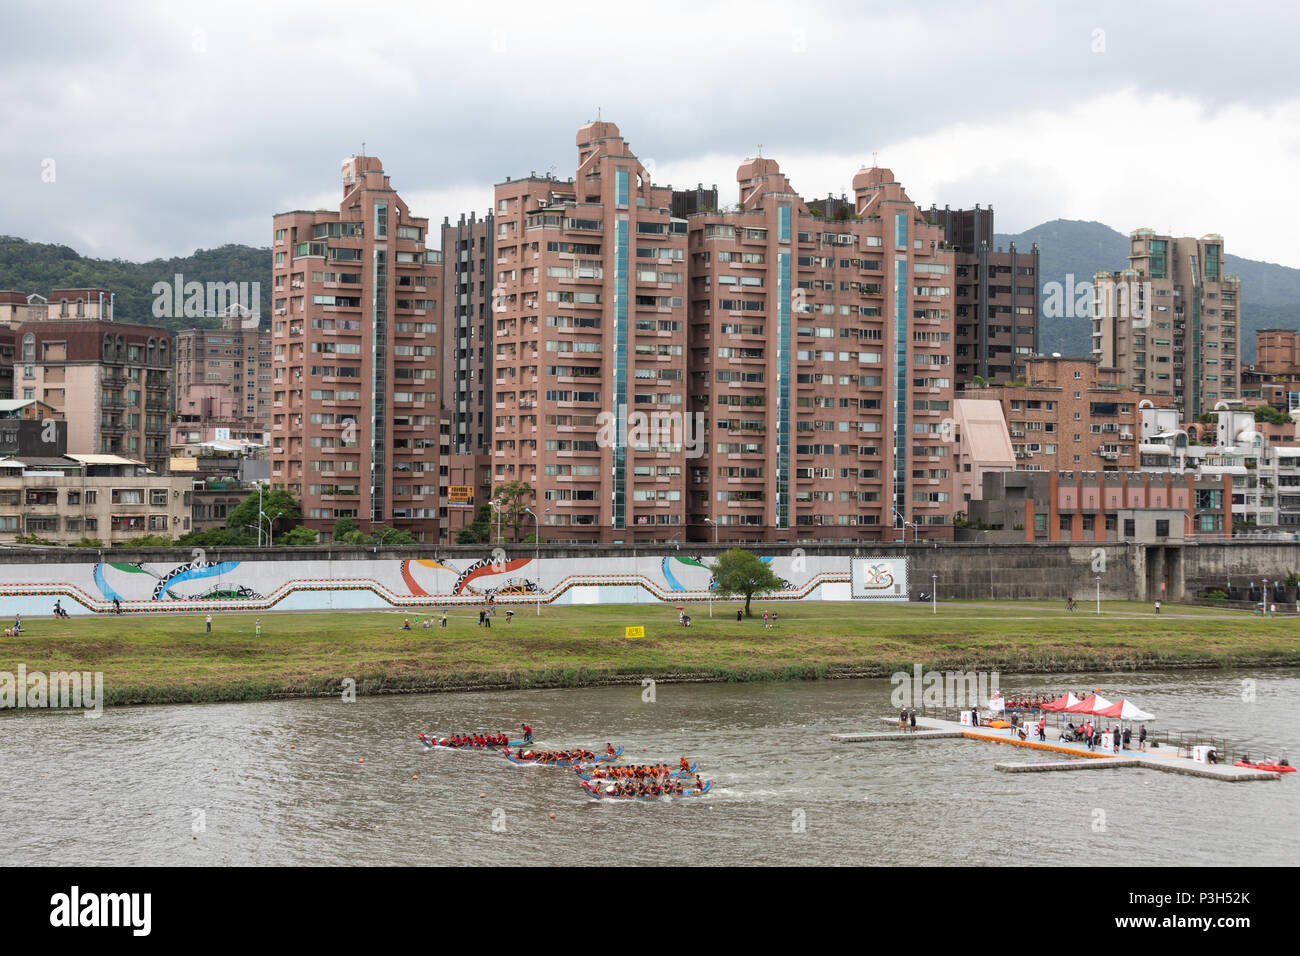 Taipei, Taiwan, 18 June: Dragon boats teams pass participate in the annual Dragon boat races on Keelung River marking Dragon Boat Festival, also known as Duanwu Festival, which falls on the fifth day of the fifth lunar month. Credit: Perry Svensson/Alamy Live News Stock Photo